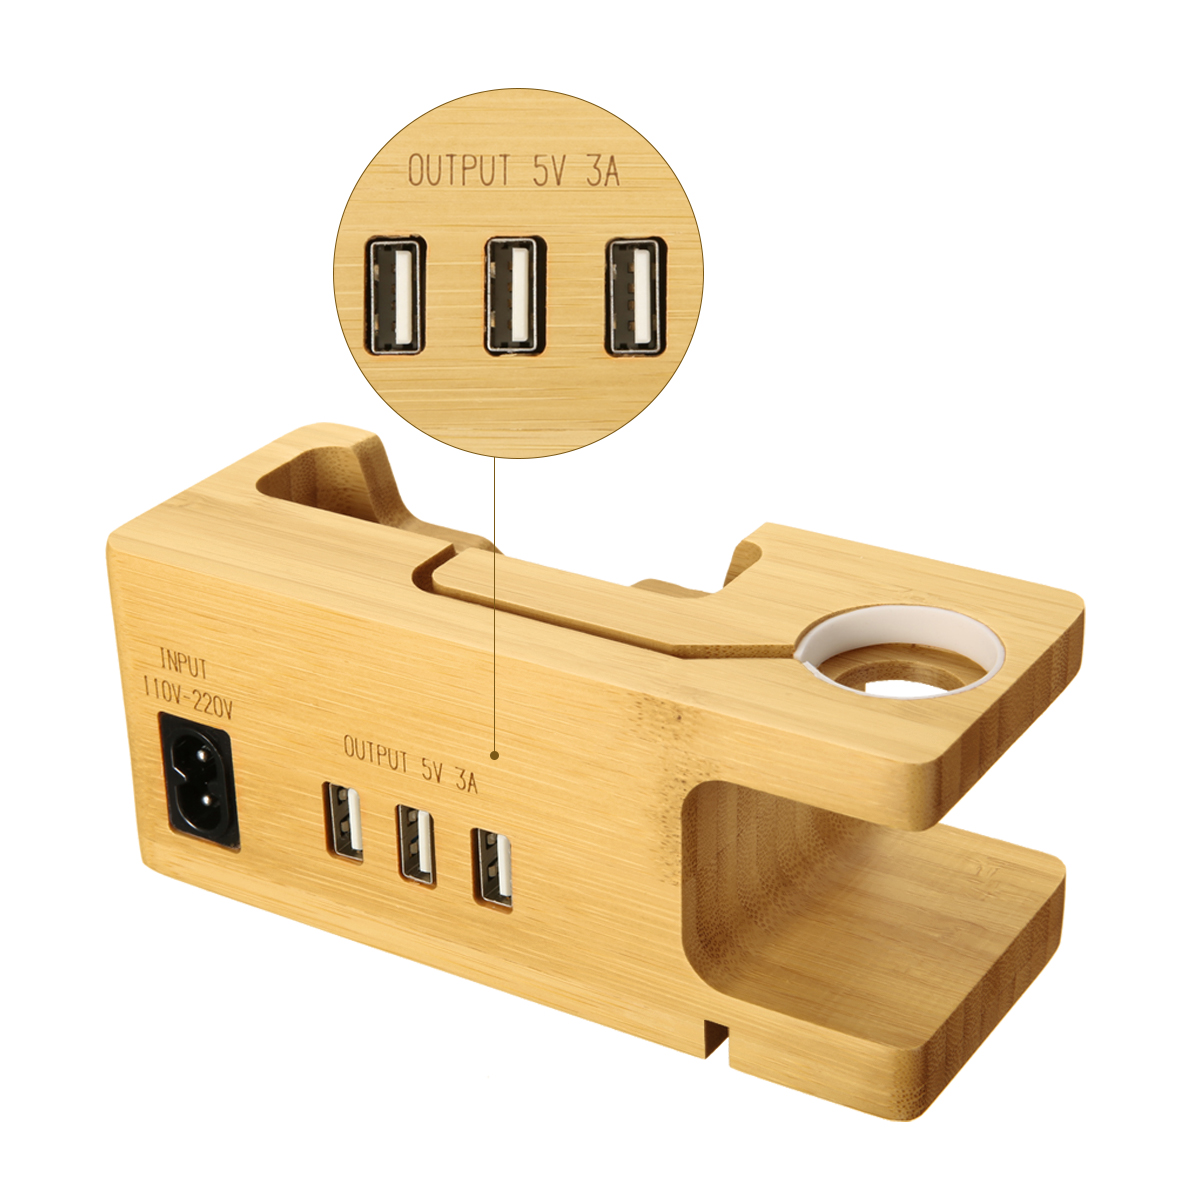 Bakeey-3USB-Charging-Station-Phone-Dock-Station-Fast-Charging-For-iPhone-XS-11Pro-MI10-Huawei-P30-P4-1720210-6